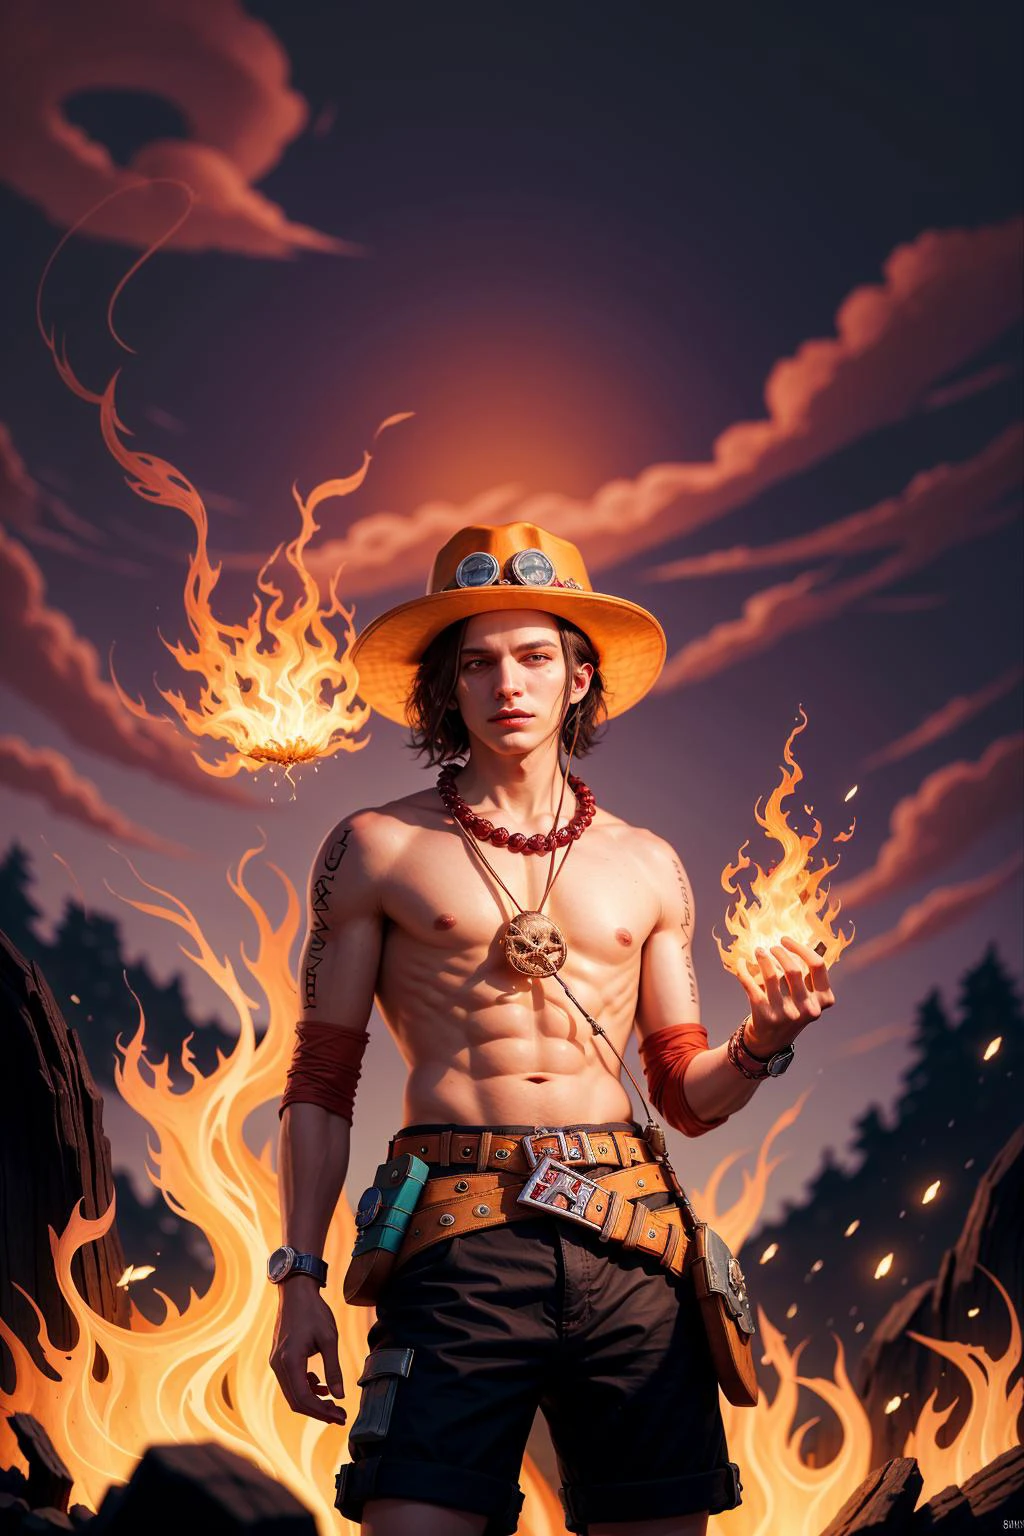 (masterpiece), (best quality:1.4), absurdres, [:intricate details:0.2], hyperrealistic, photography, kkw-ph1, 1 man, young, 18-year-old, (elven:0.7) portgas d. ace, freckles, hat, topless male, shorts, belt, jewelry, necklace, brown hair flaps, (style-swirlmagic:1.0), looking down, solo, (full body:0.6), detailed background, detailed face, (V0id3nergy, void theme:1.1)  sinister smirk, red color scheme, dark purple light, library, glowing magical runes, dark atmosphere, shadows, realistic lighting, floating particles, embers, surrounded by fire, summoning, red arcane symbols, power-hungry eyes, 